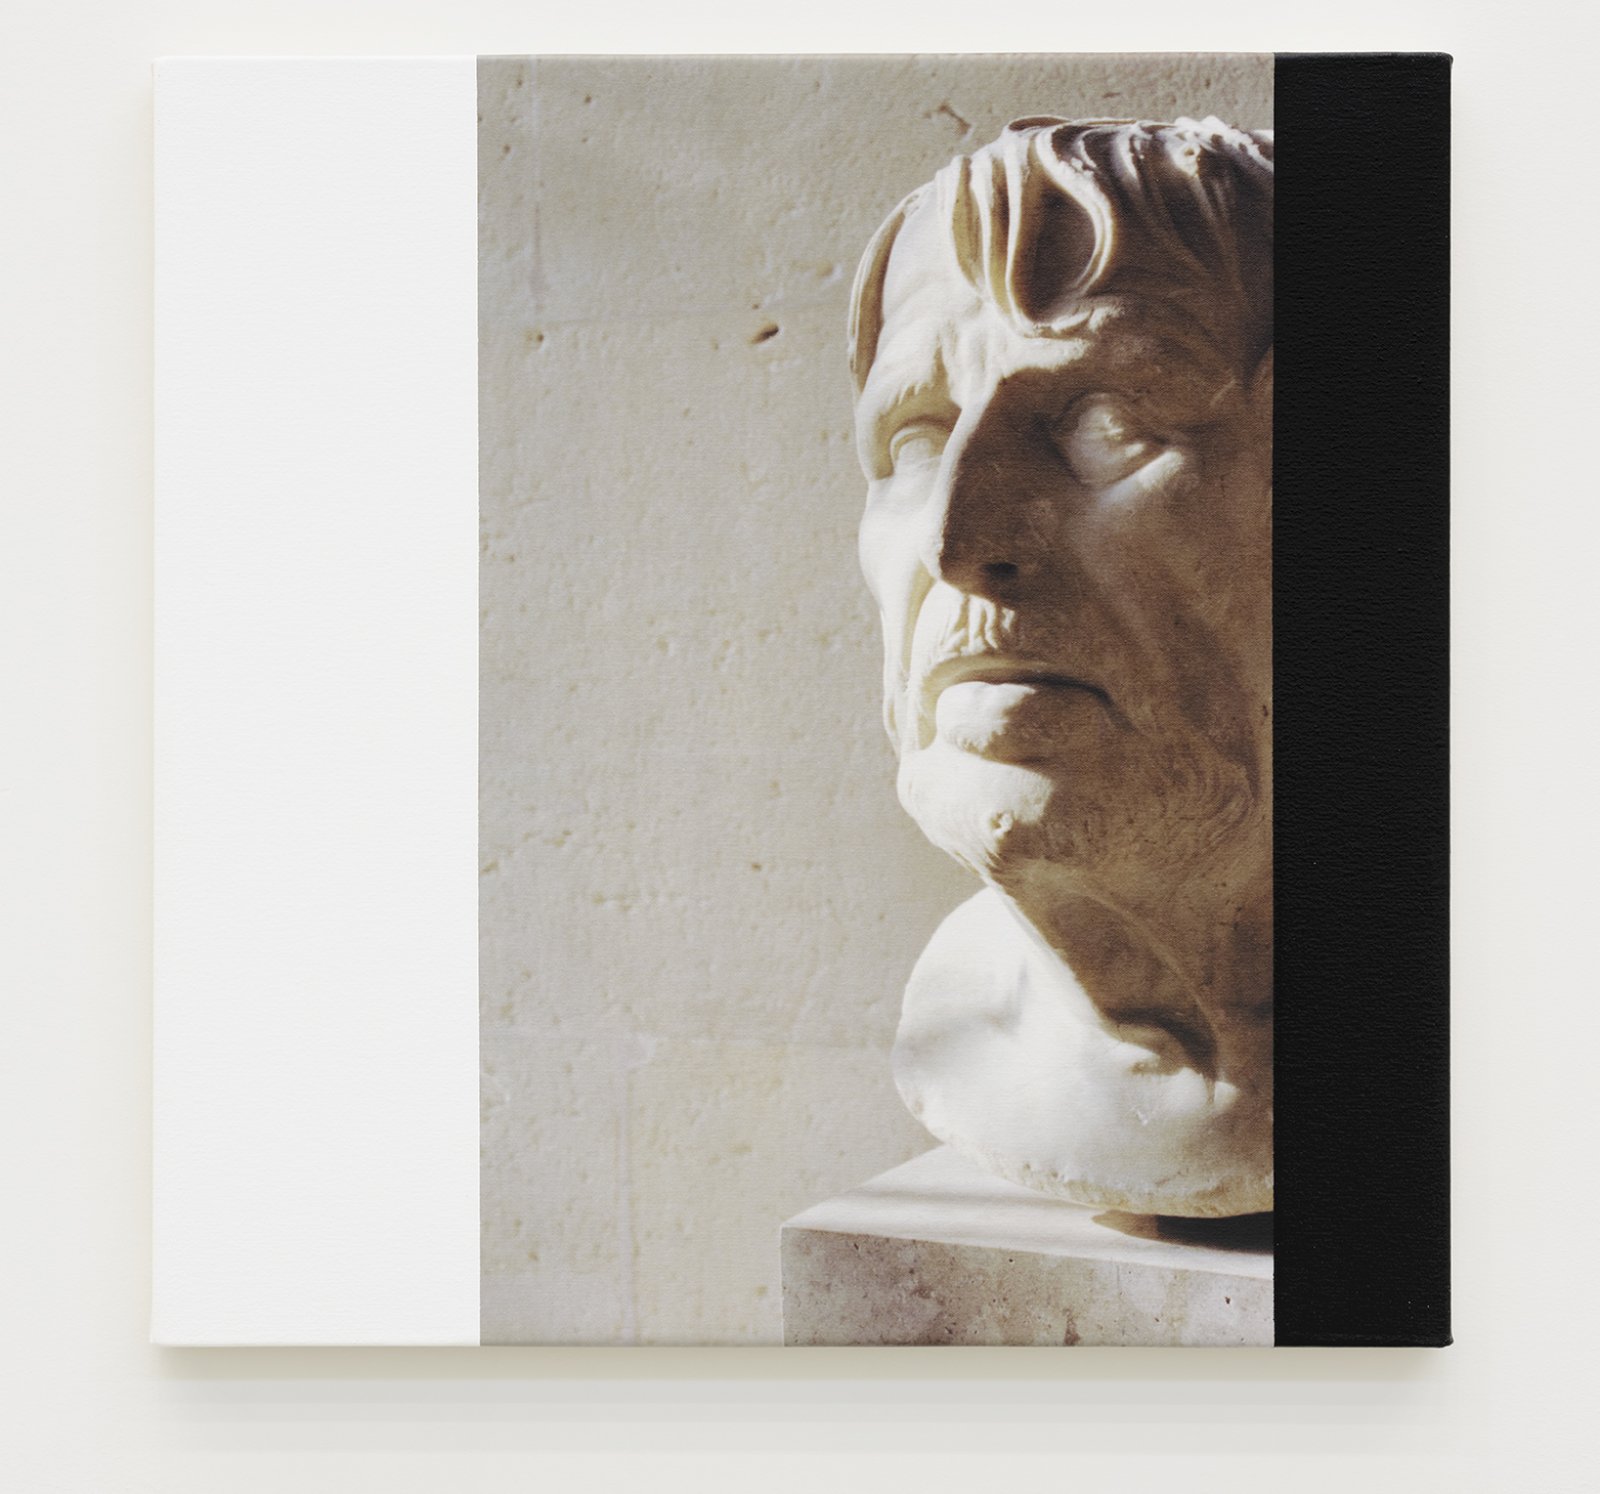 ​Ian Wallace, Roman Heads I–IV, 1990/2015, photolaminate with acrylic on canvas, 4 parts, each 24 x 24 in. (61 x 61 cm) by Ian Wallace